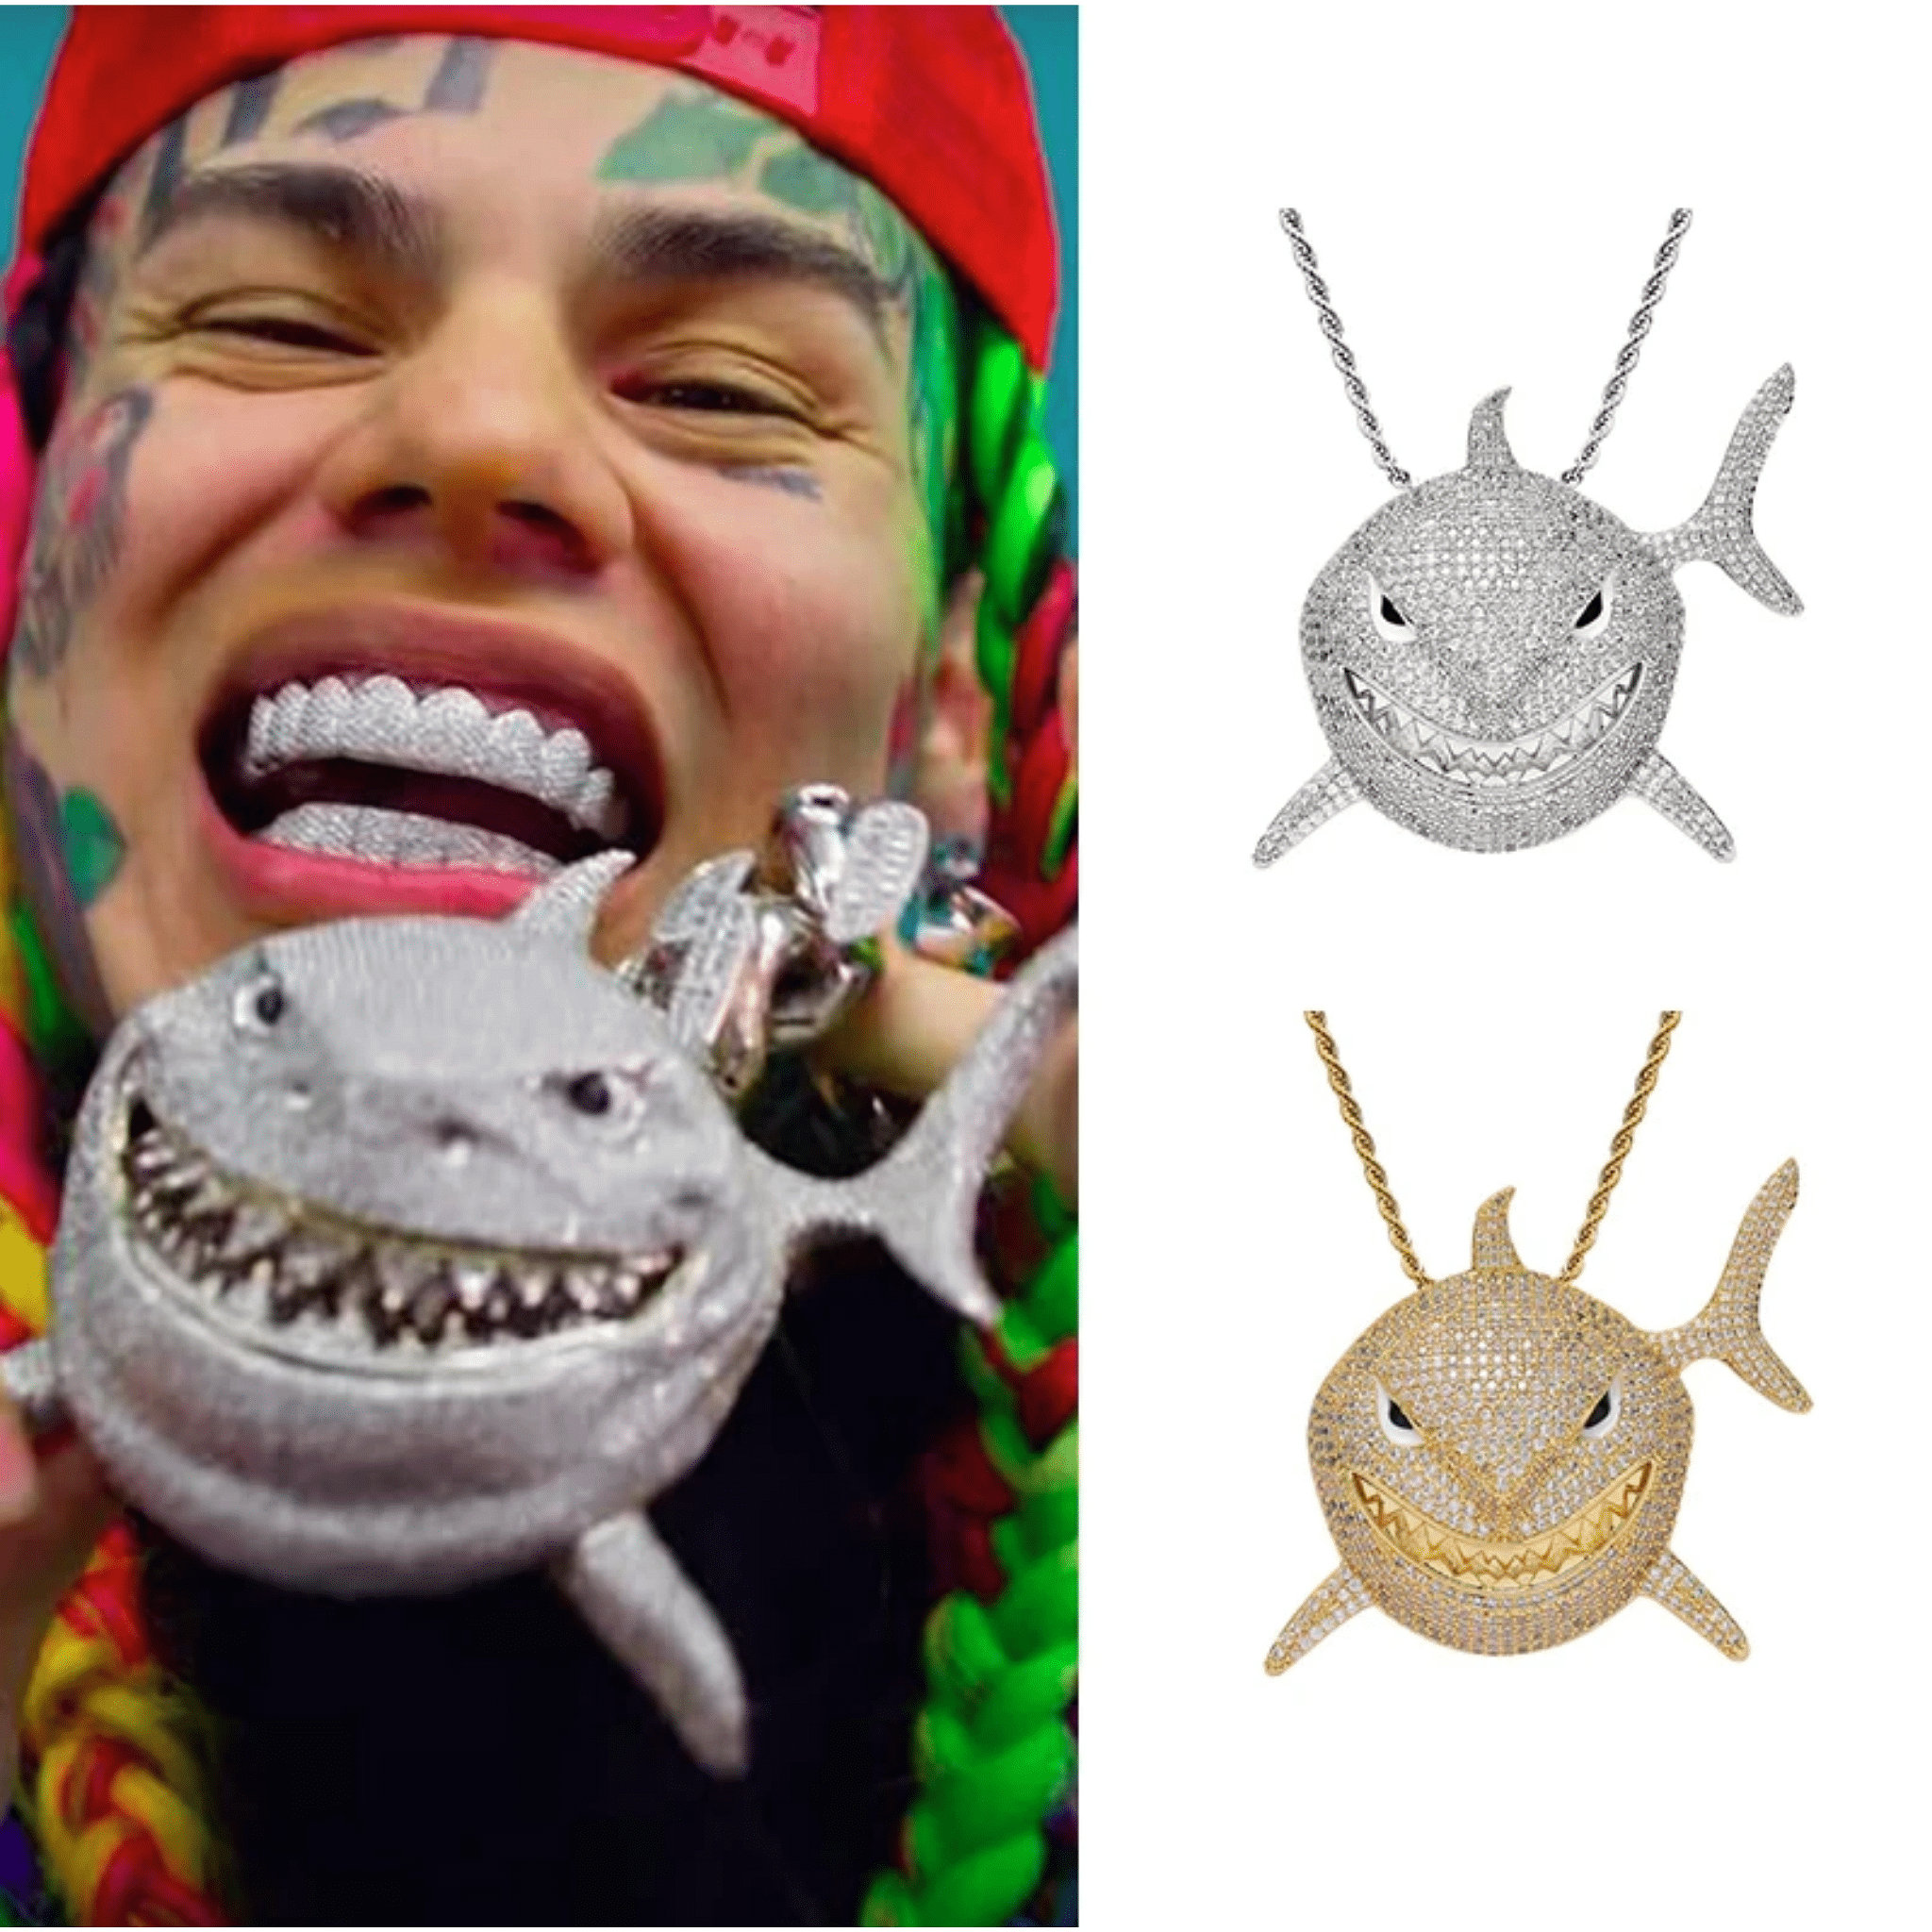 VVS Jewelry hip hop jewelry Gold / Rope Chain / 18 Inch Shark 6IX9INE Bling Pendant Necklace